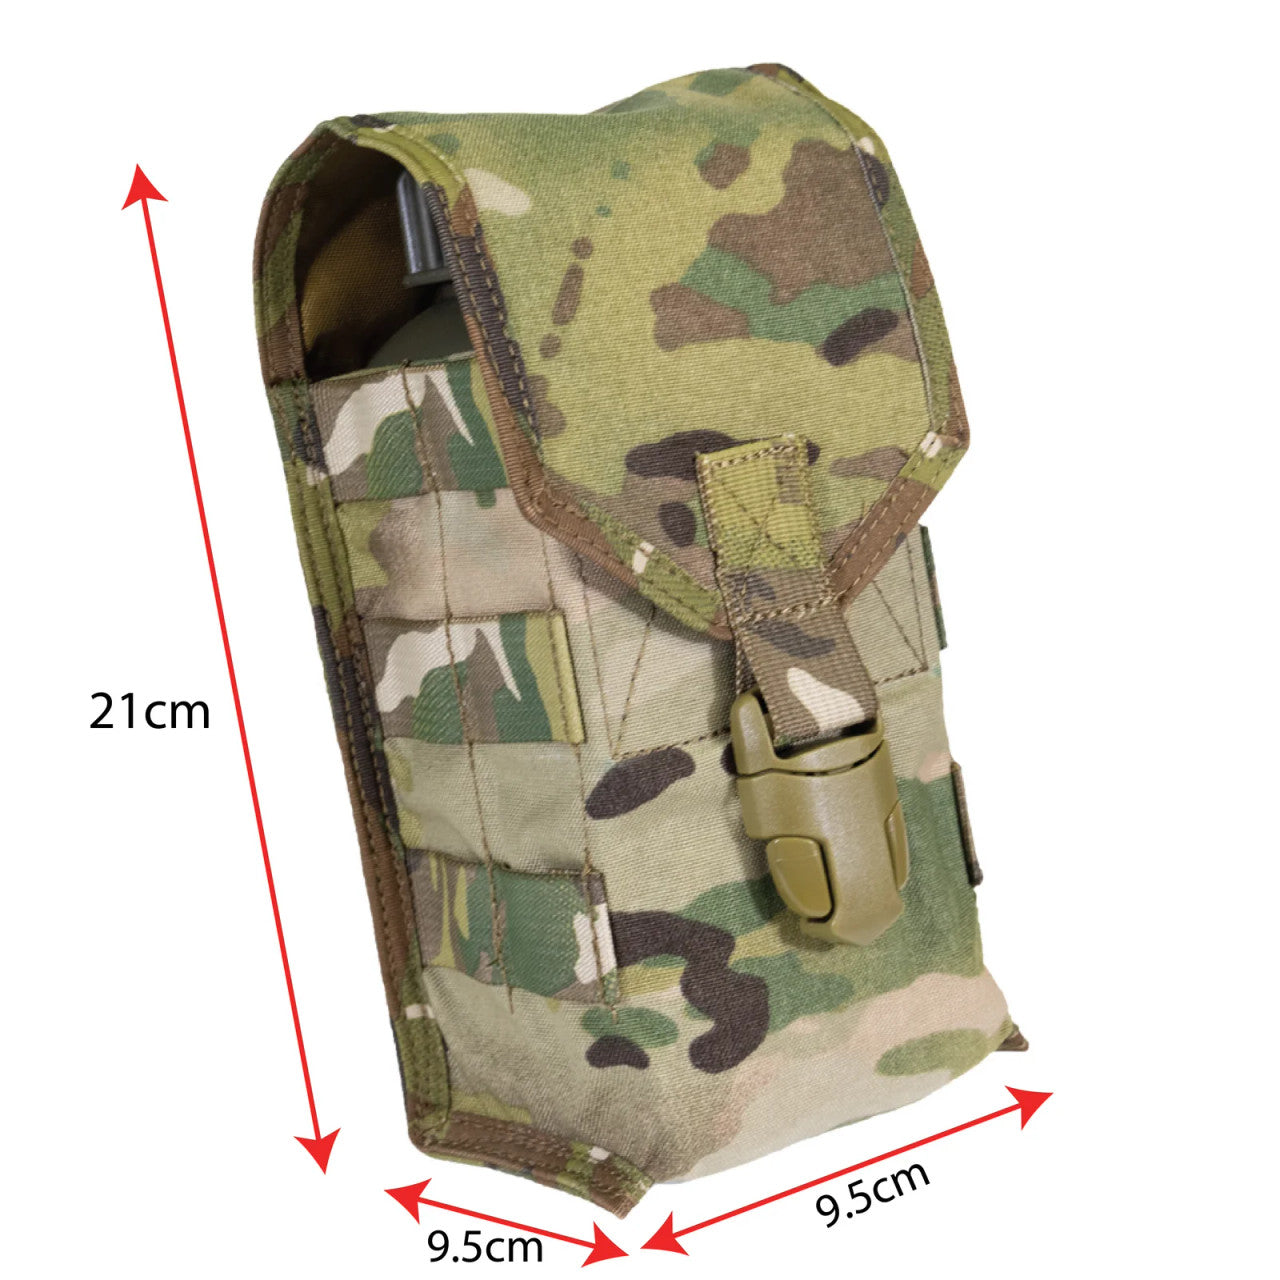 Introducing our incredible Multicam Water Bottle Holder, designed specifically to fit the standard ADF 1L square water bottle. Crafted with the utmost care and precision, this holder is made from high-quality nylon material, ensuring durability and longevity. www.defenceqstore.com.au